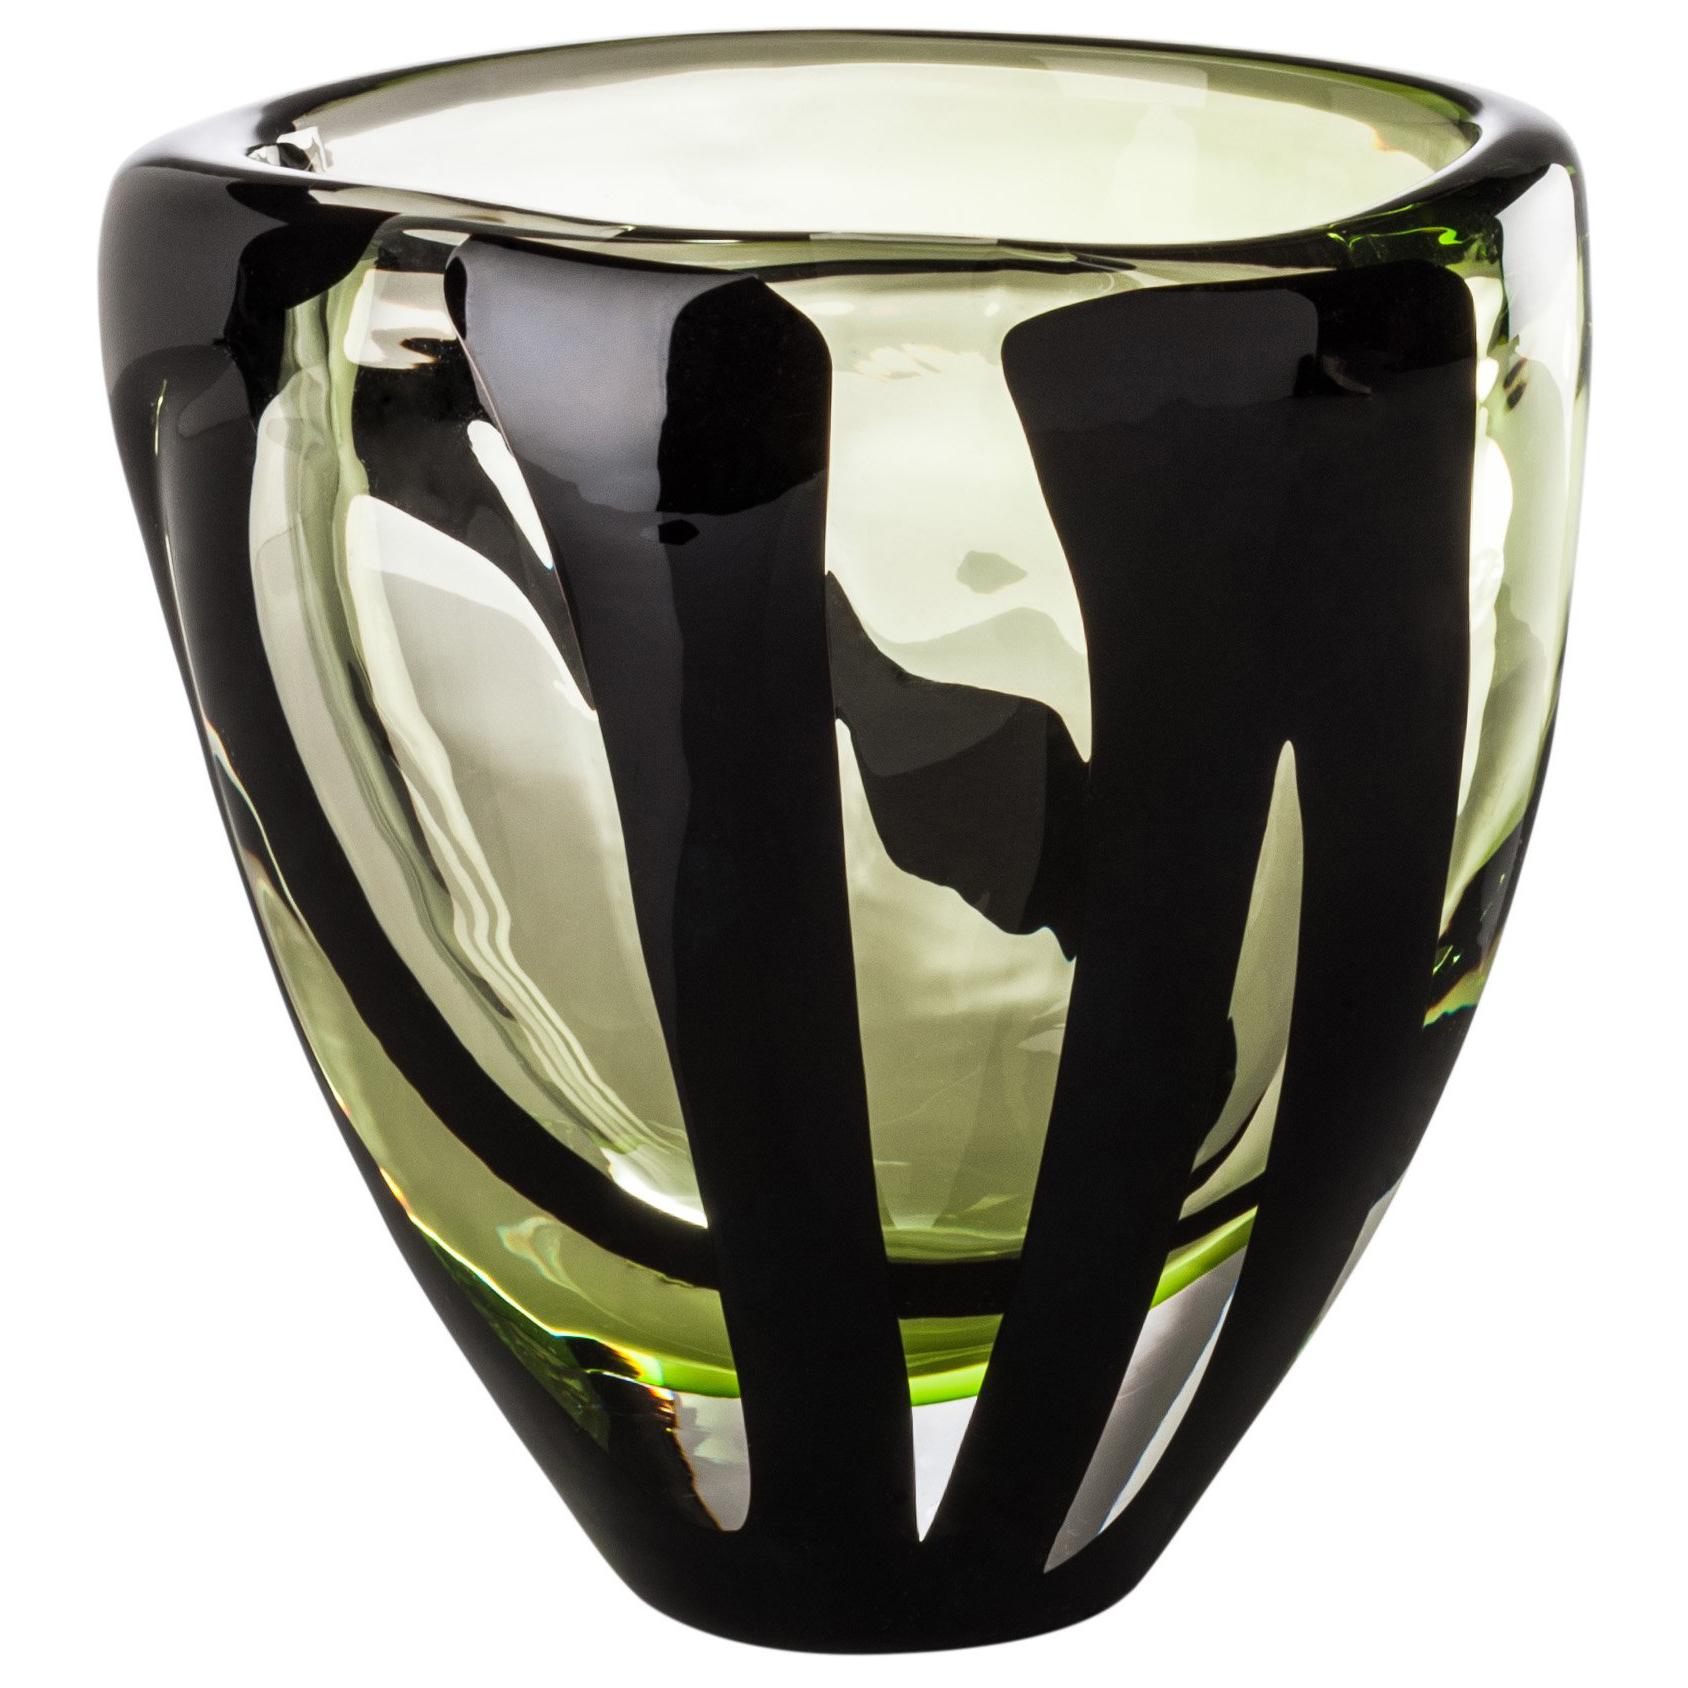 Venini Small Black Belt Oval Glass Vase in Crystal and Green by Peter Marino